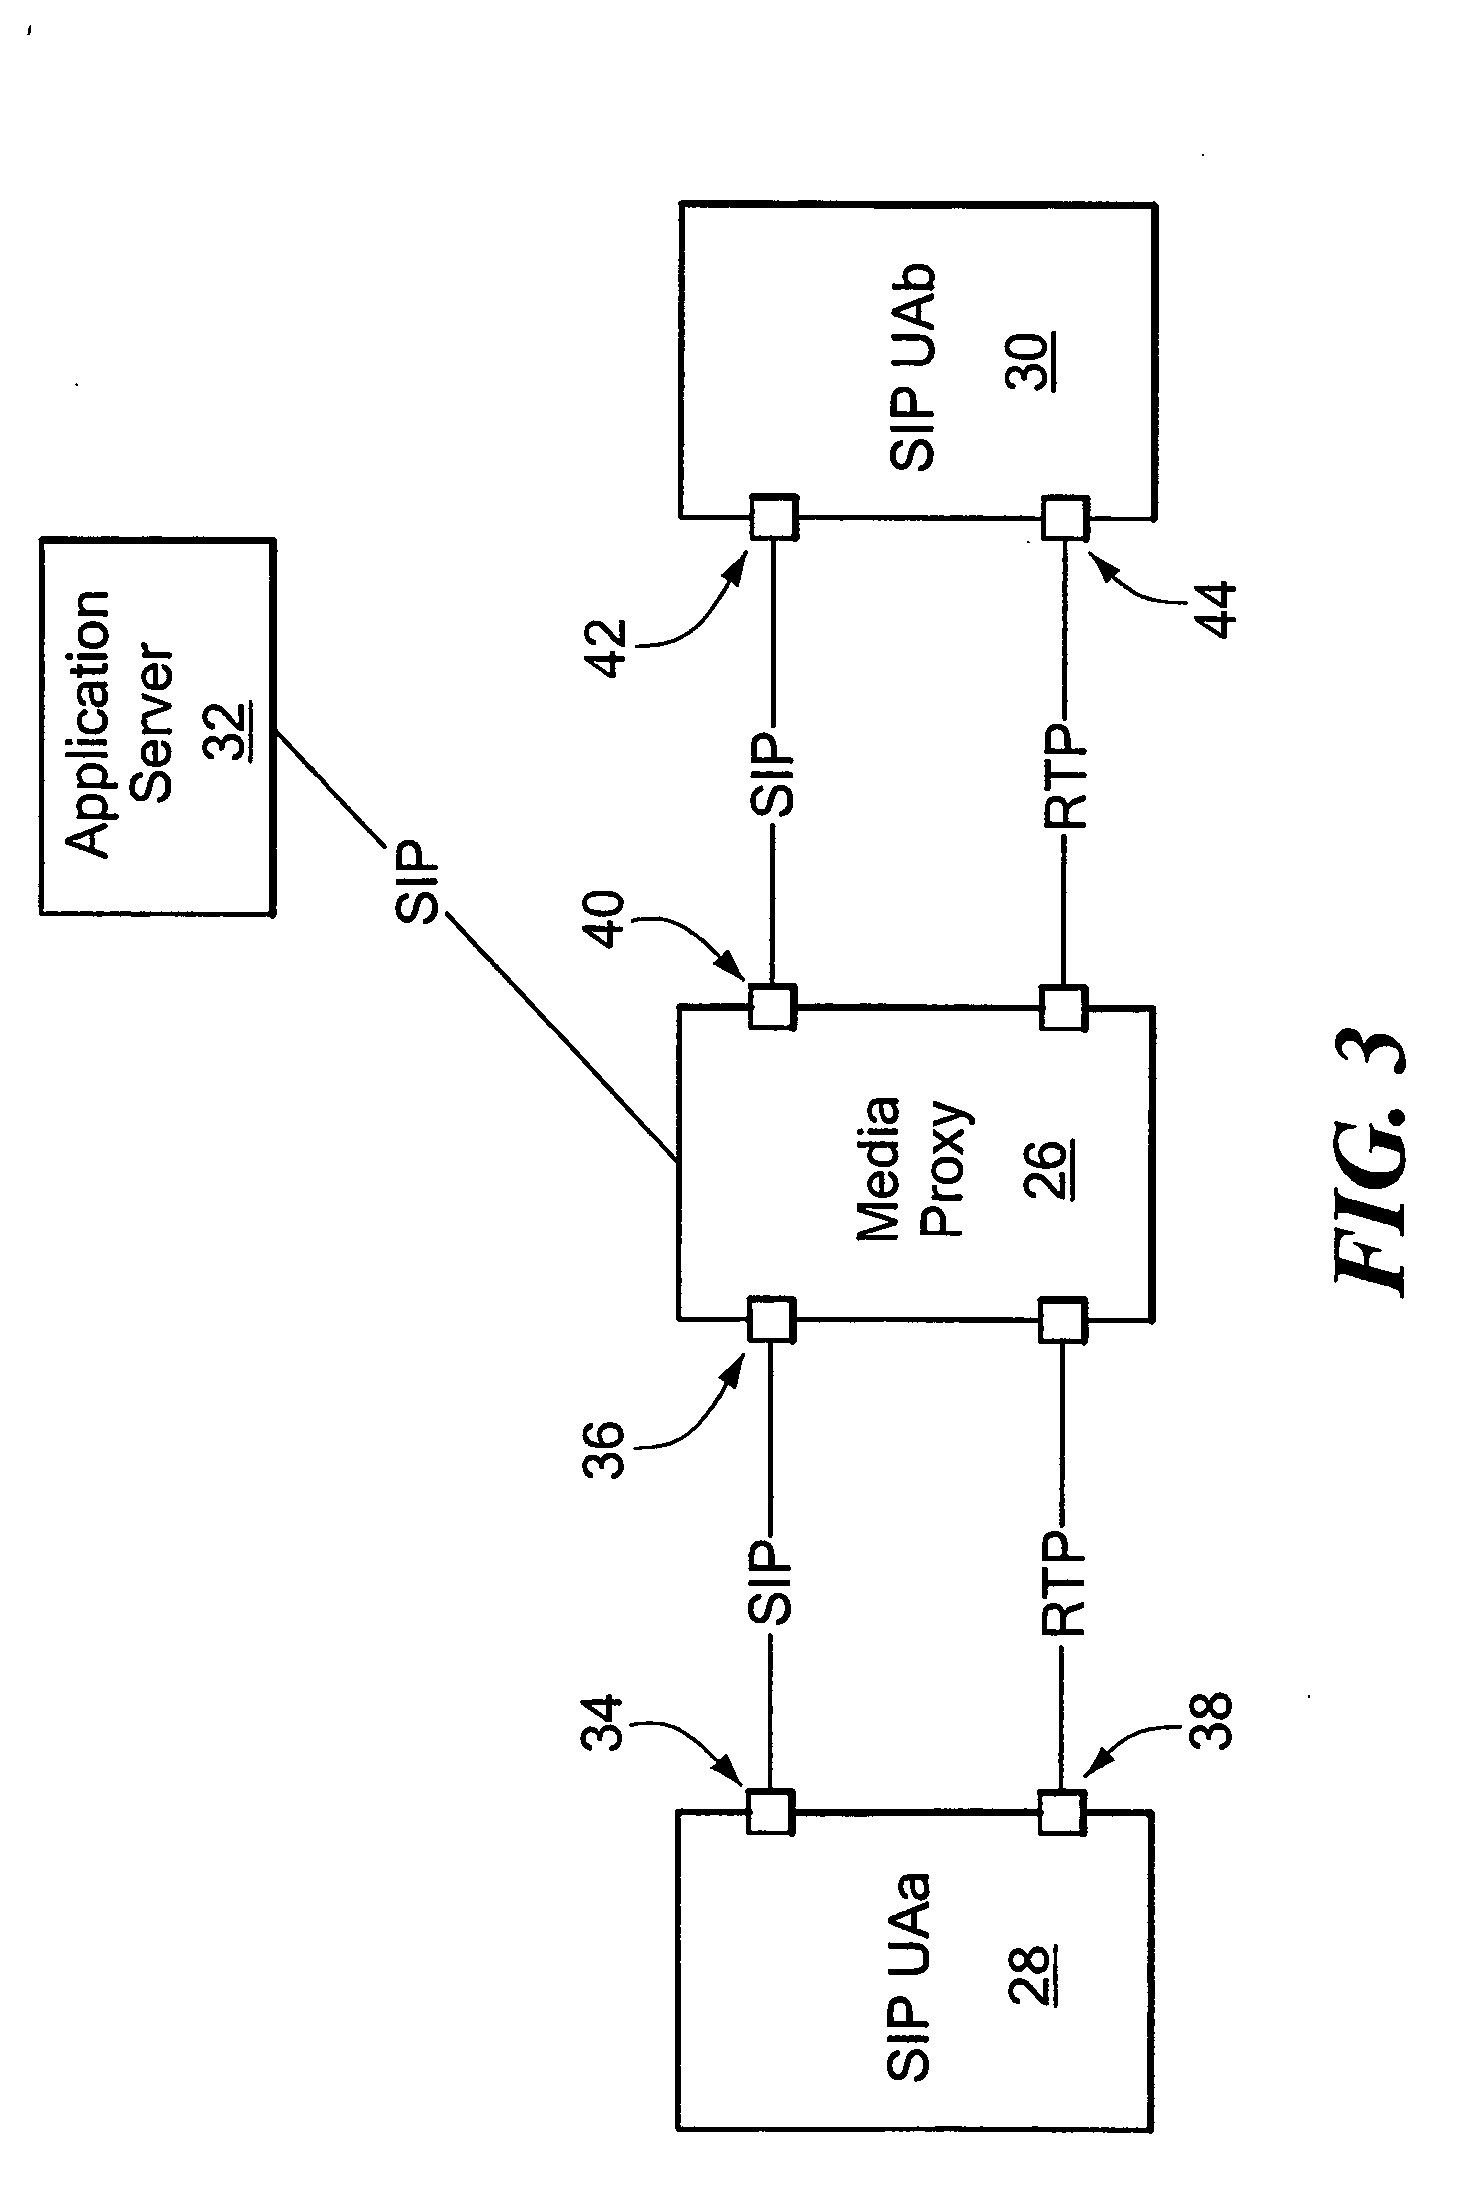 Remote control of device by telephone or other communication devices